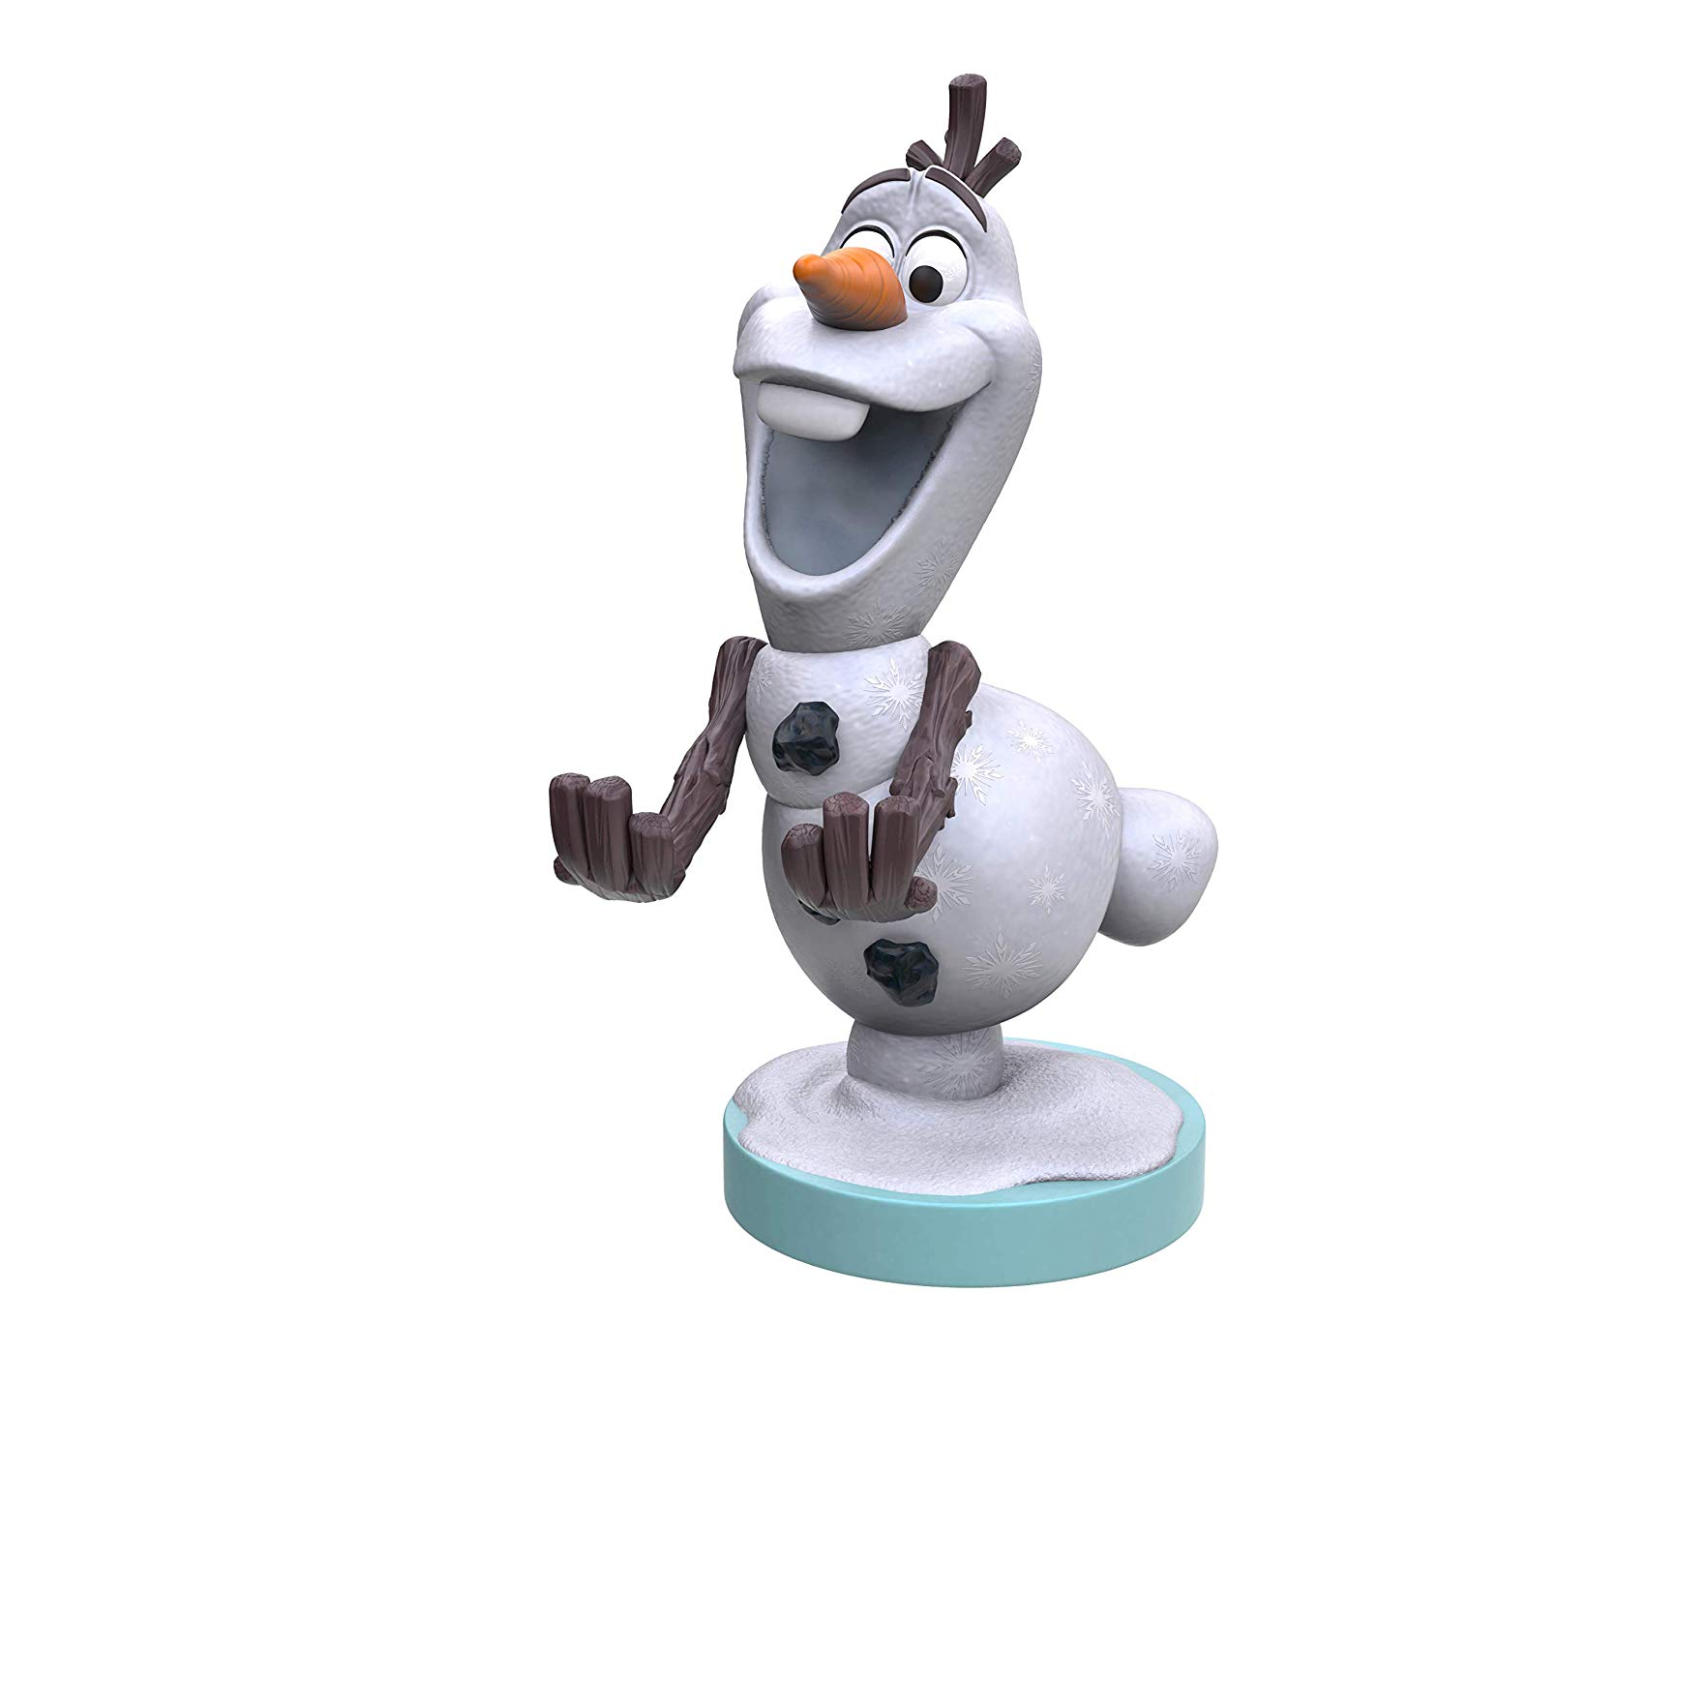 OLAF CABLE GUY